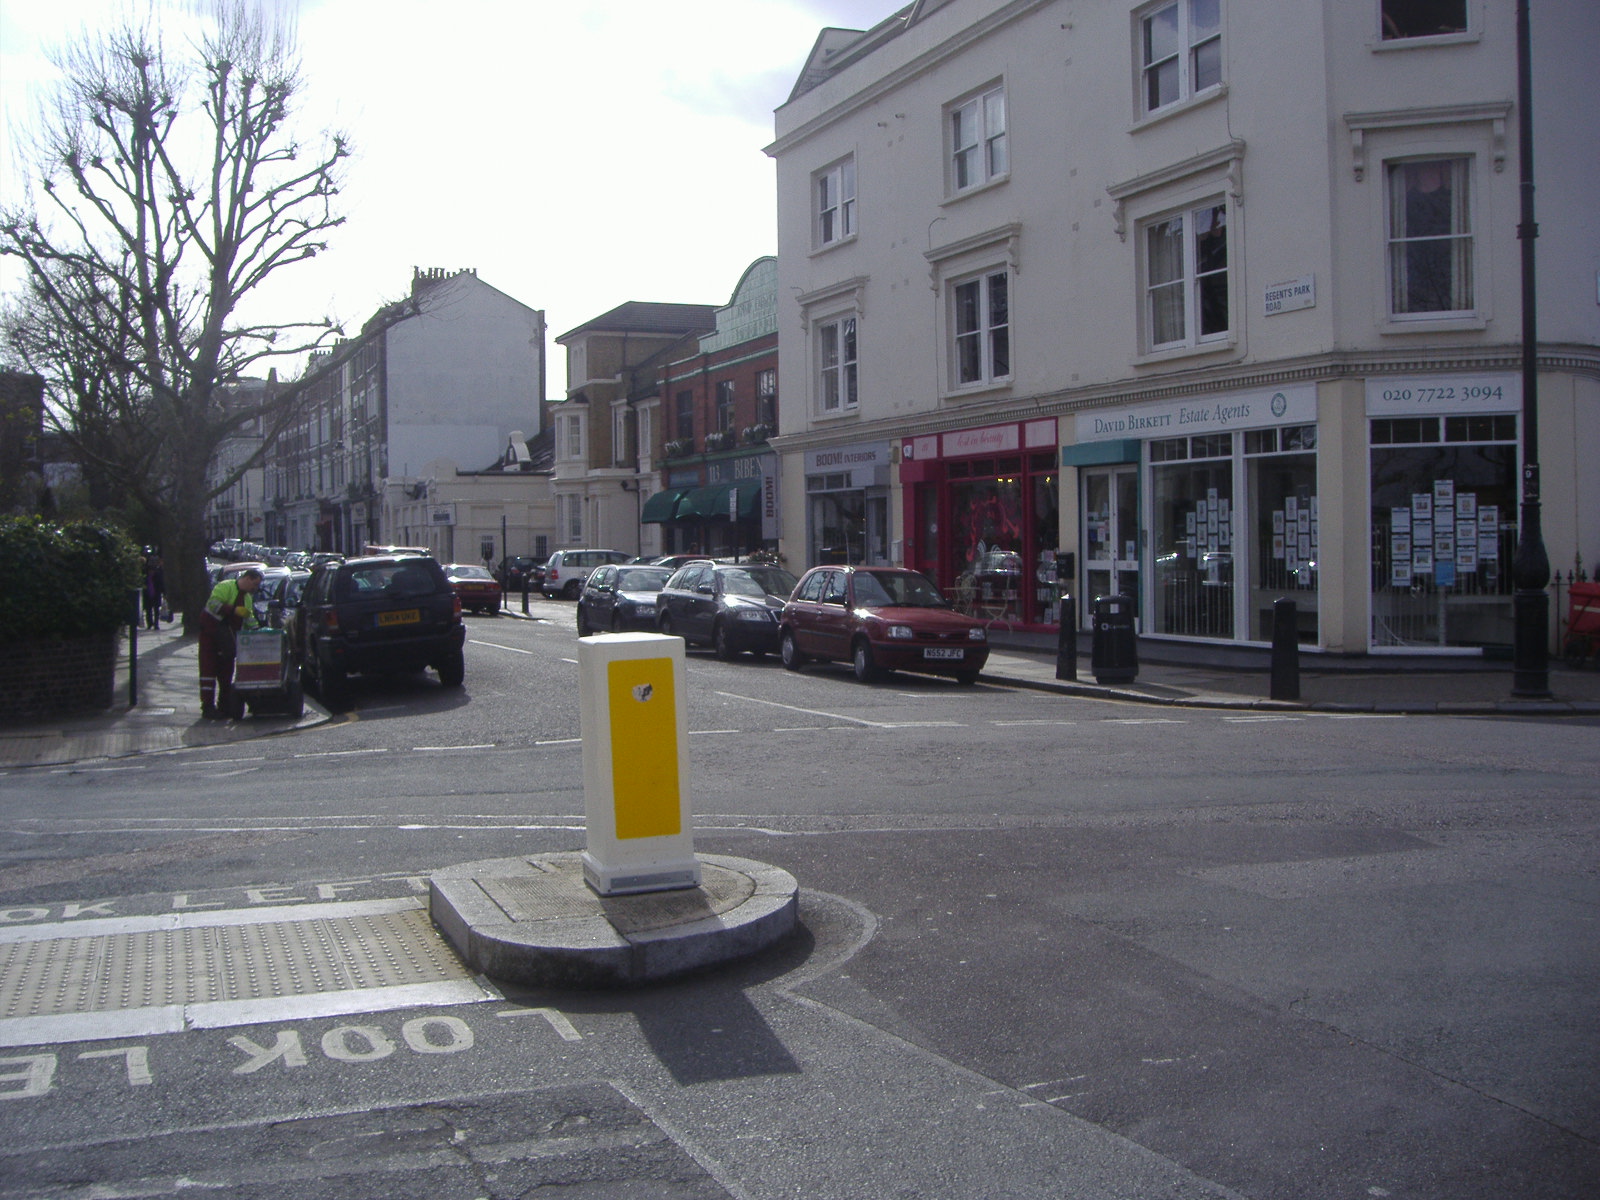 the street with yellow painted post is filled with parked cars